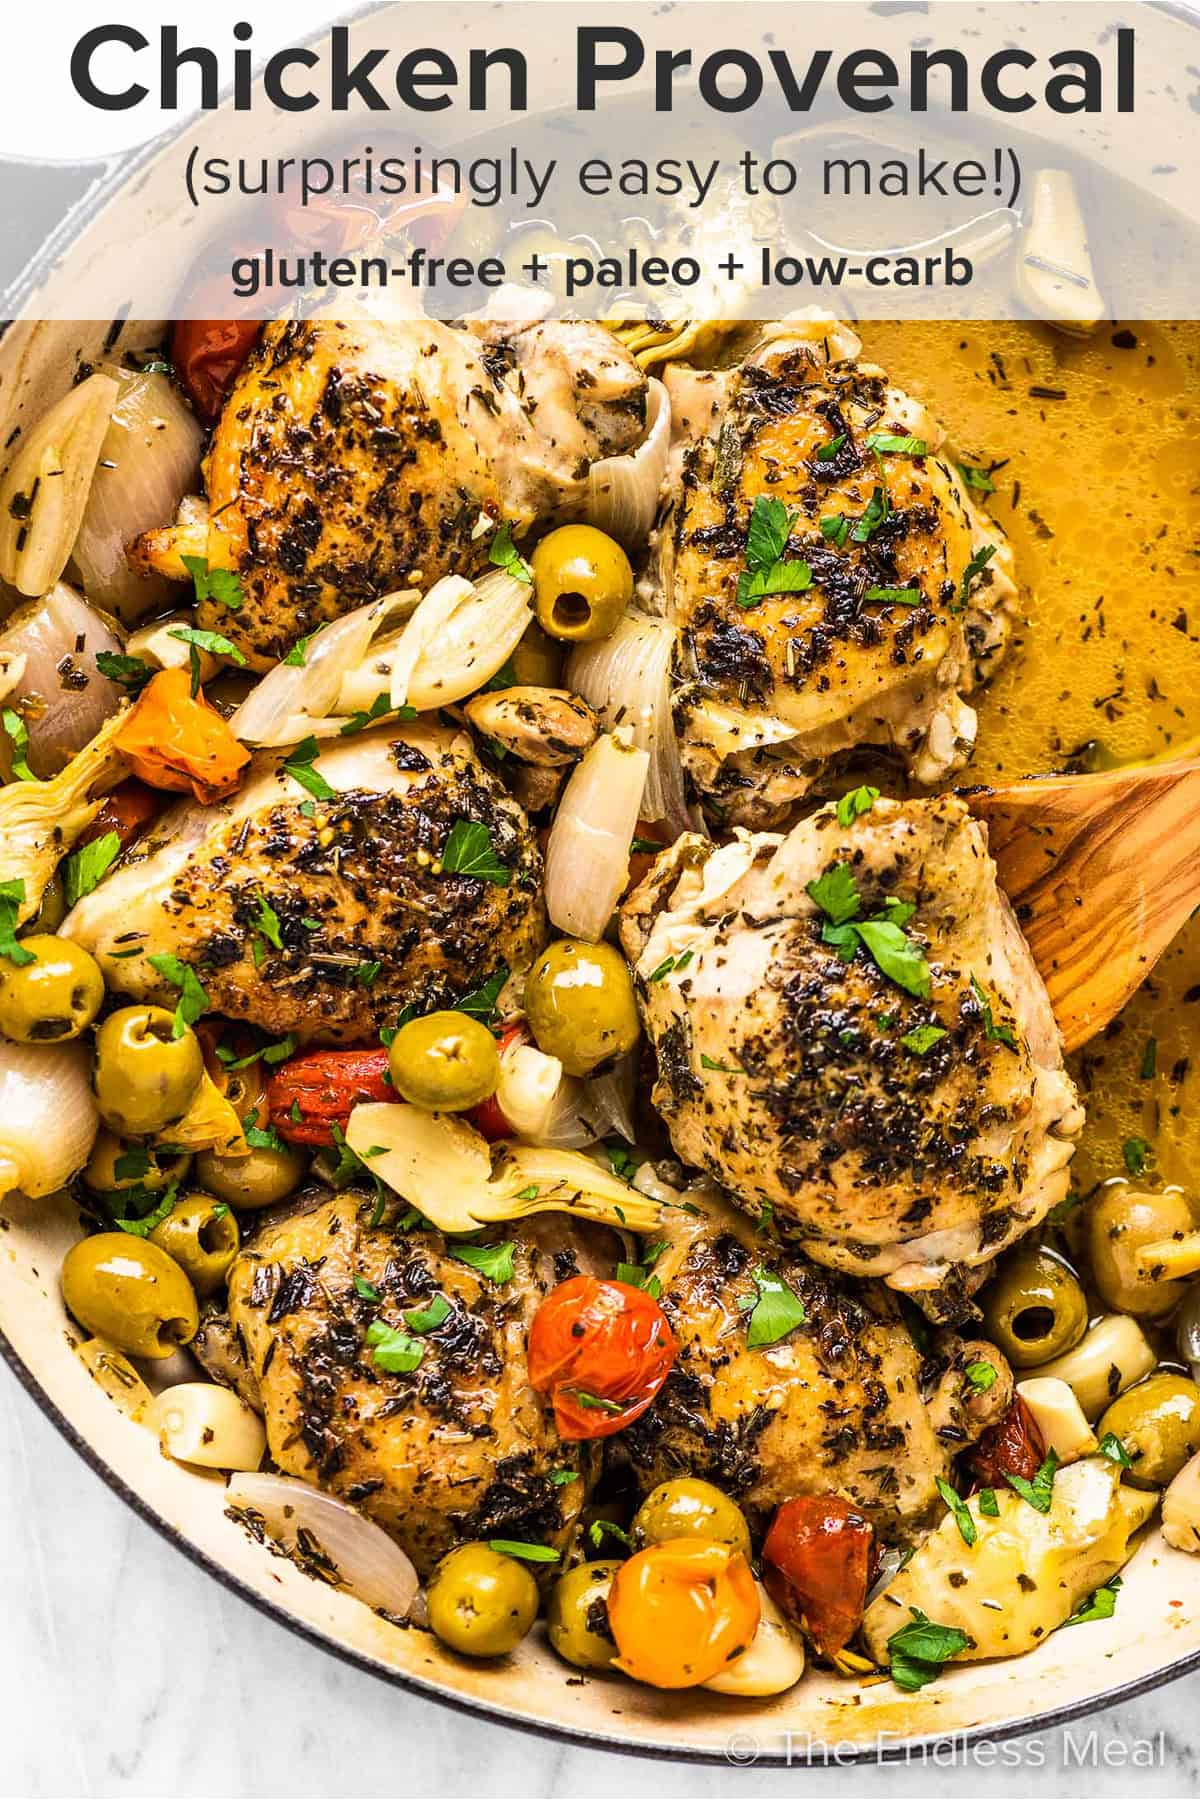 Chicken provencal in a braising pan with a wooden spoon and the recipe title on top of the picture.